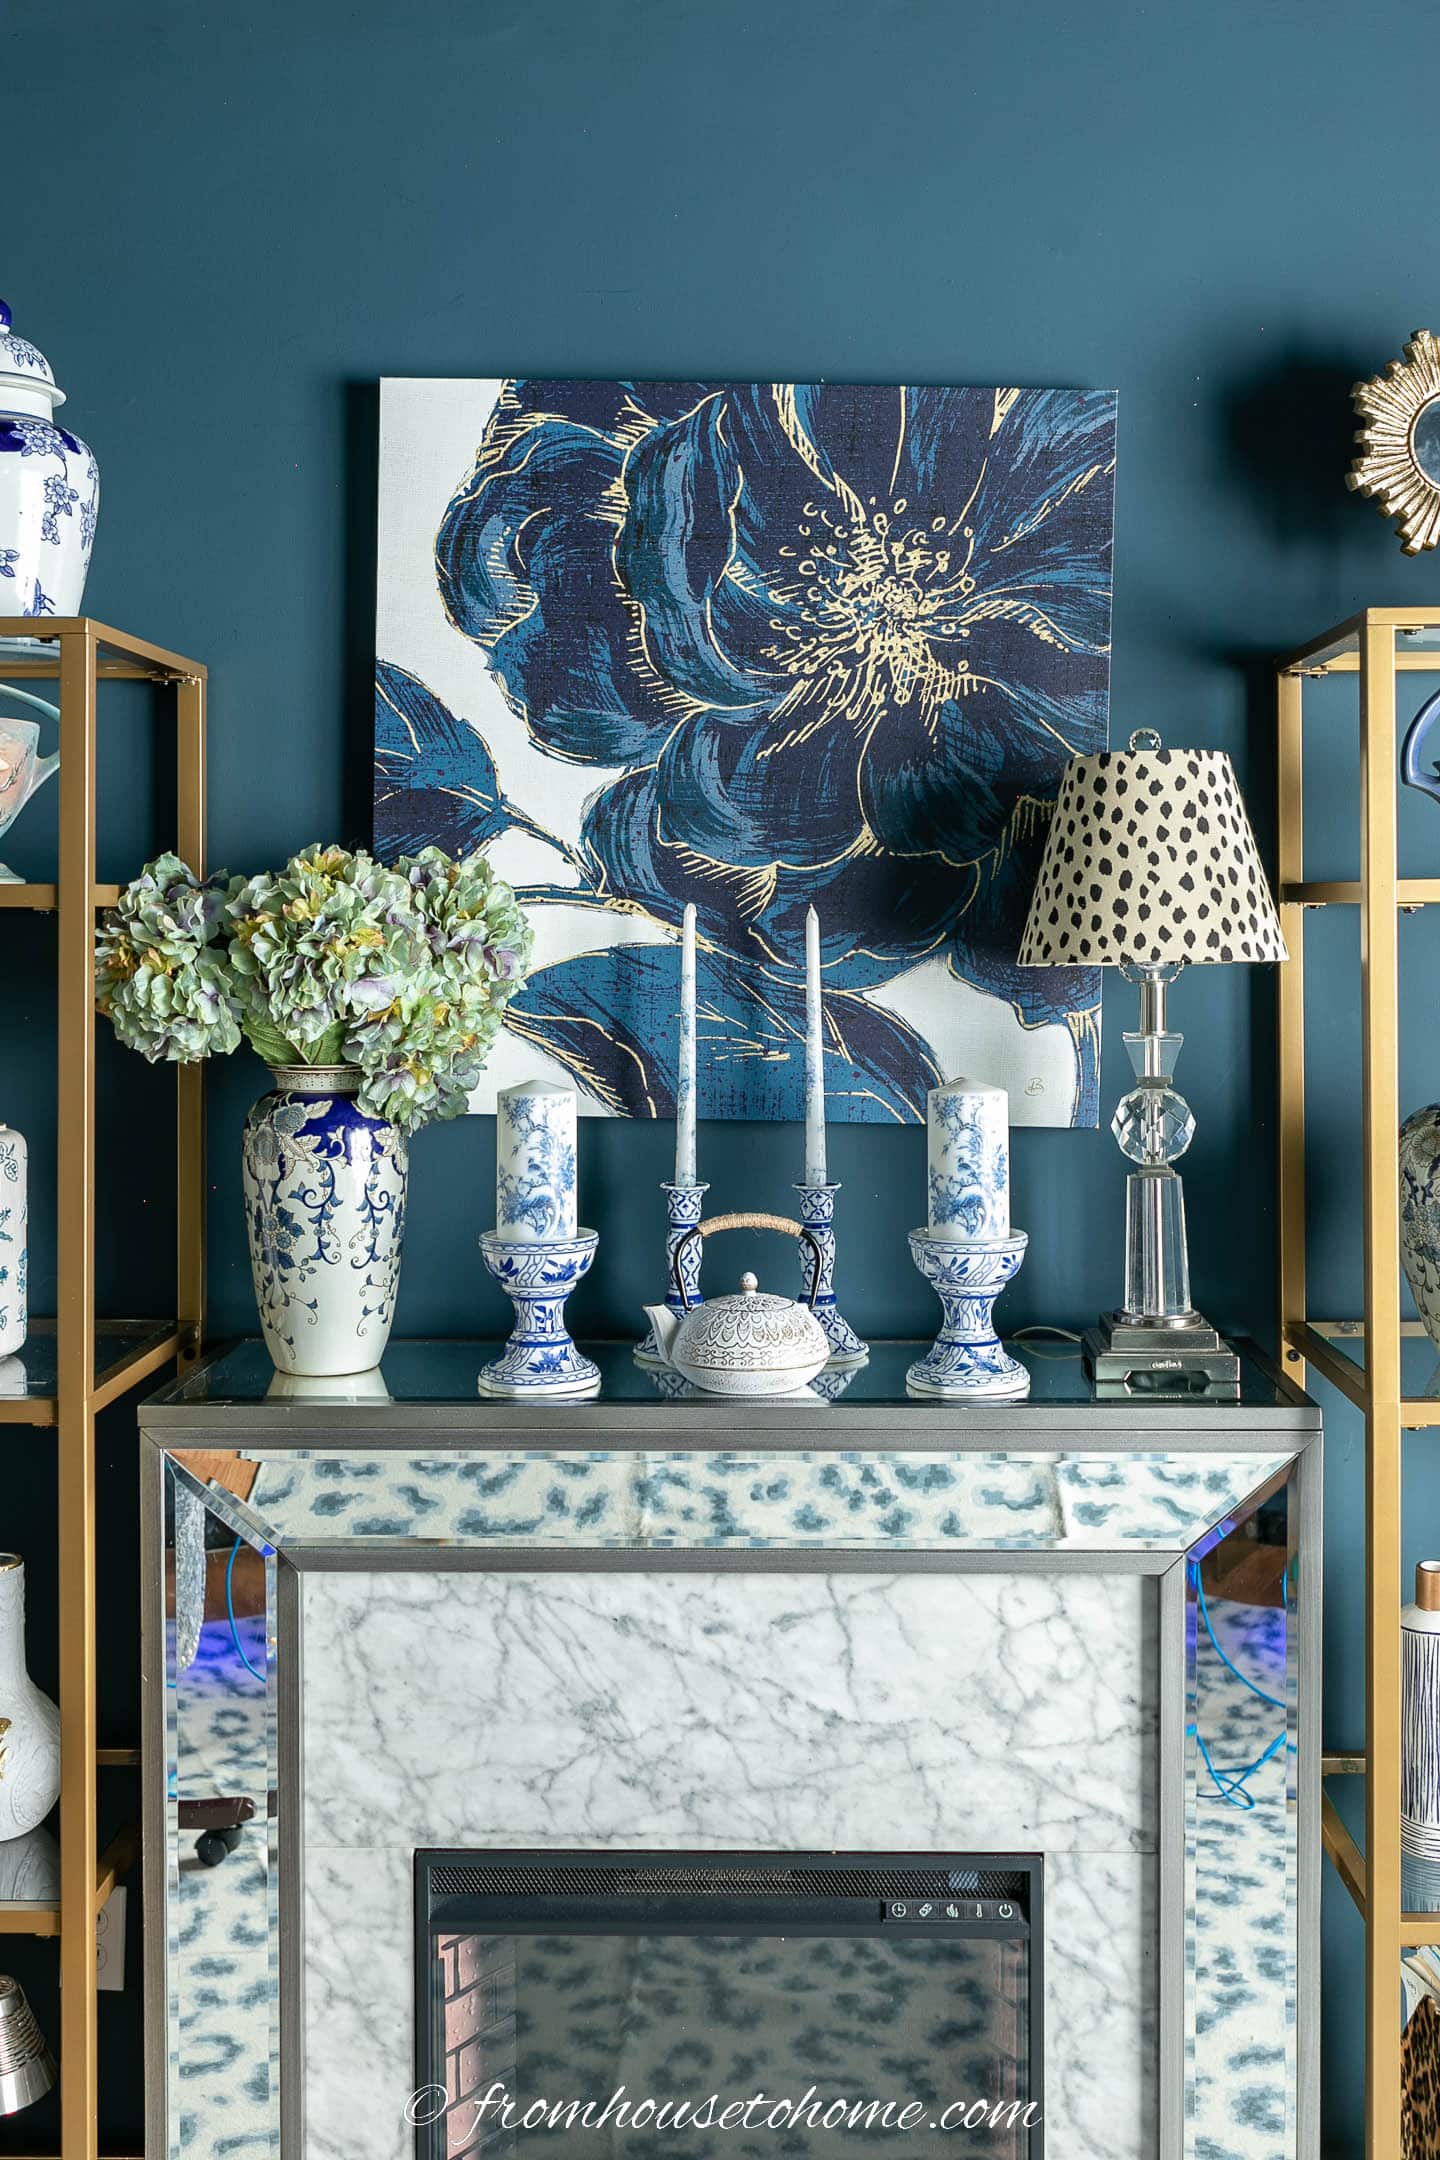 Fireplace mantel decorated with blue and white candles